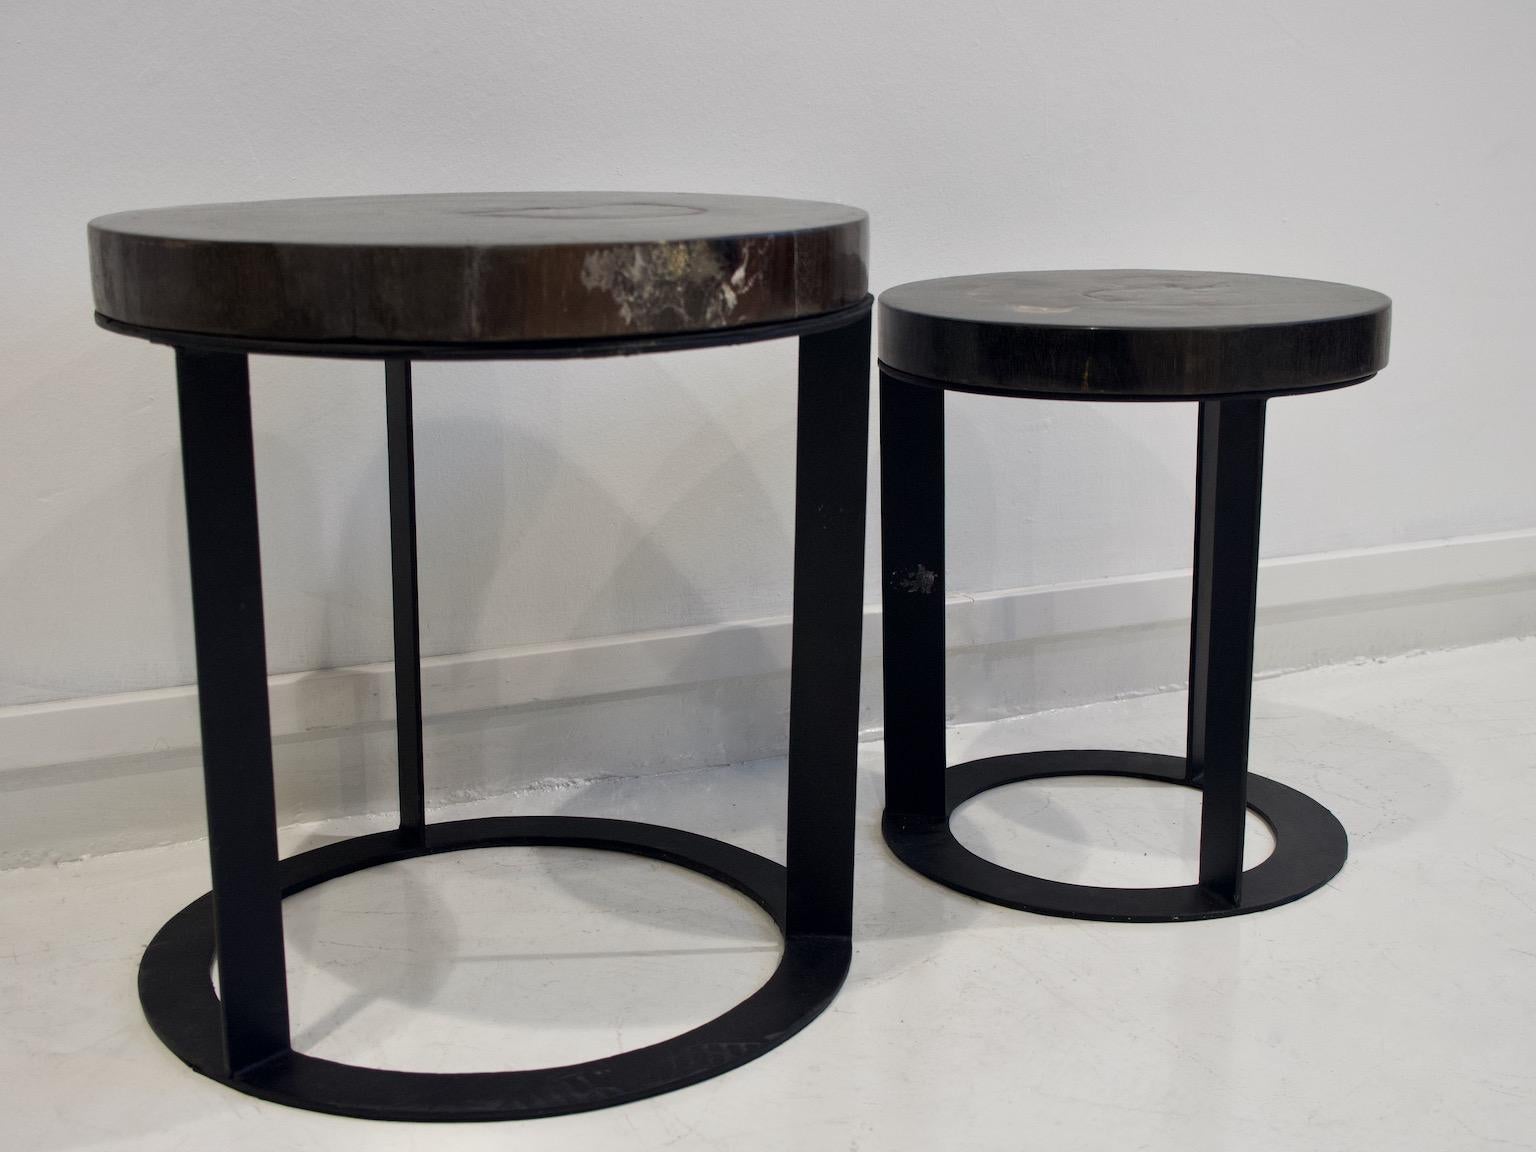 Contemporary Pair of Round Petrified Wood Side Tables on Black Metal Base